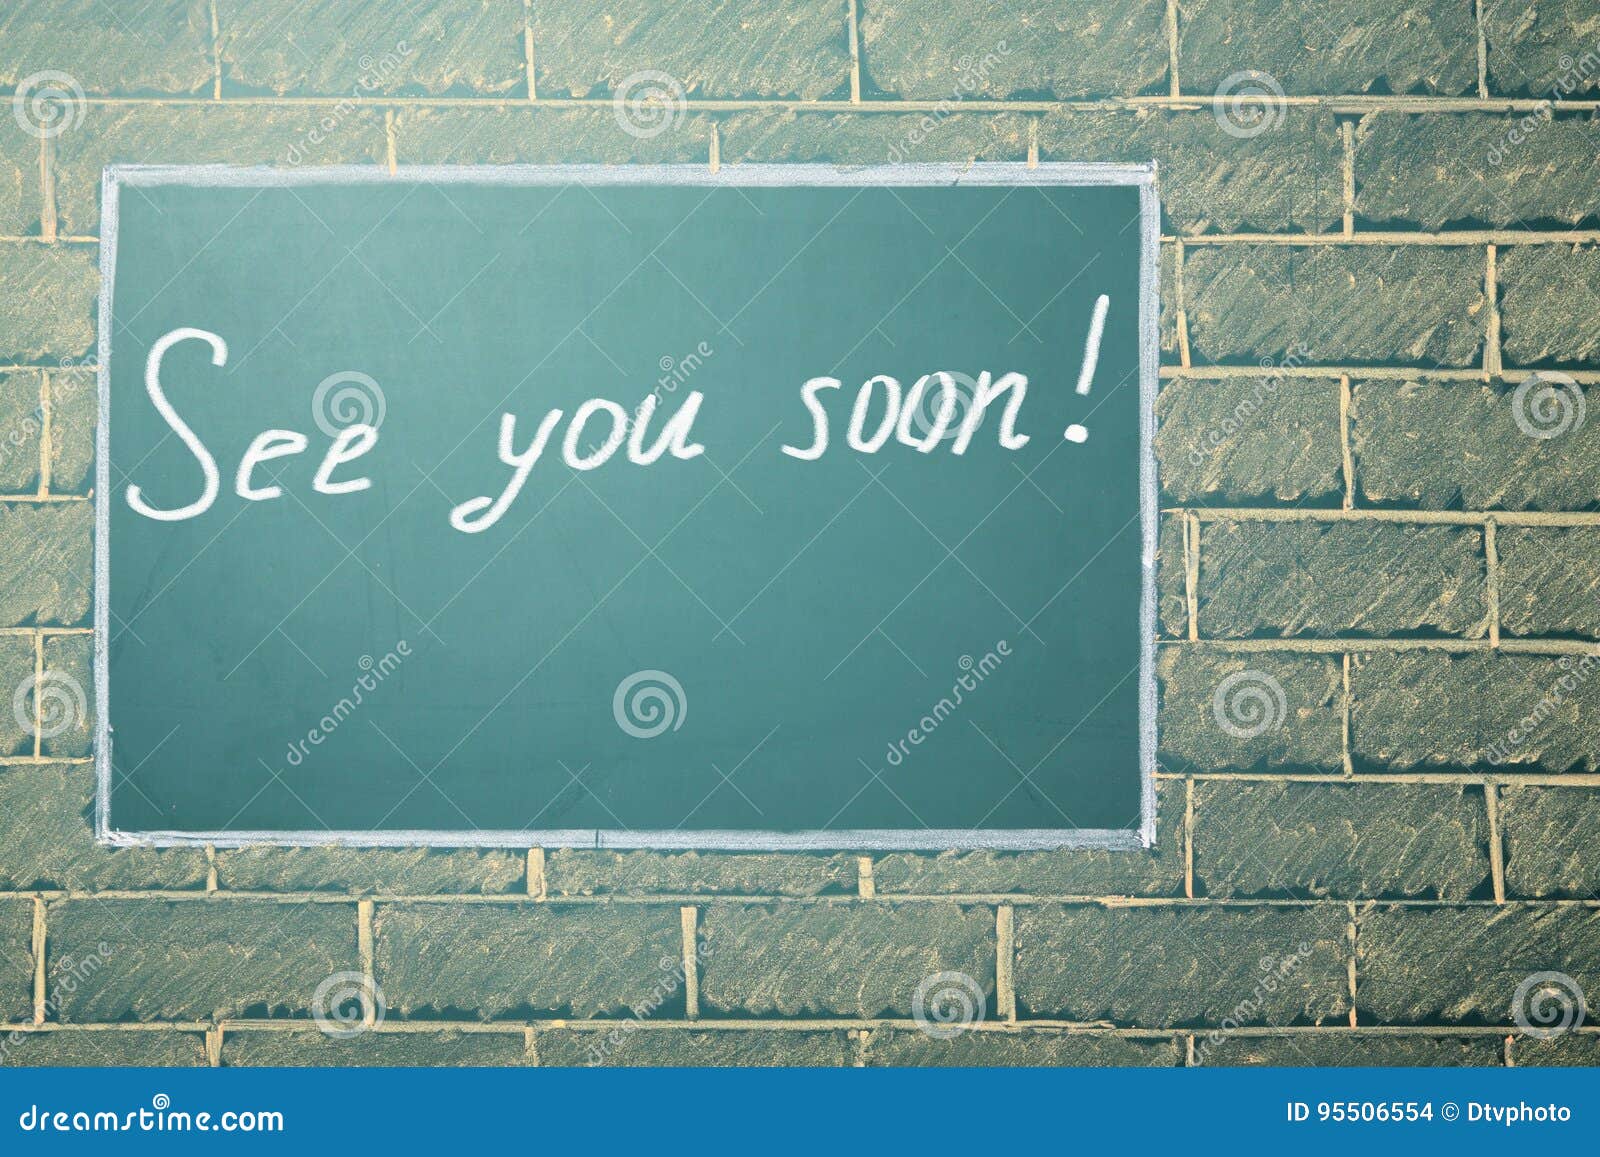 See you soon stock photo. Image of copy, exclusive, frame ...